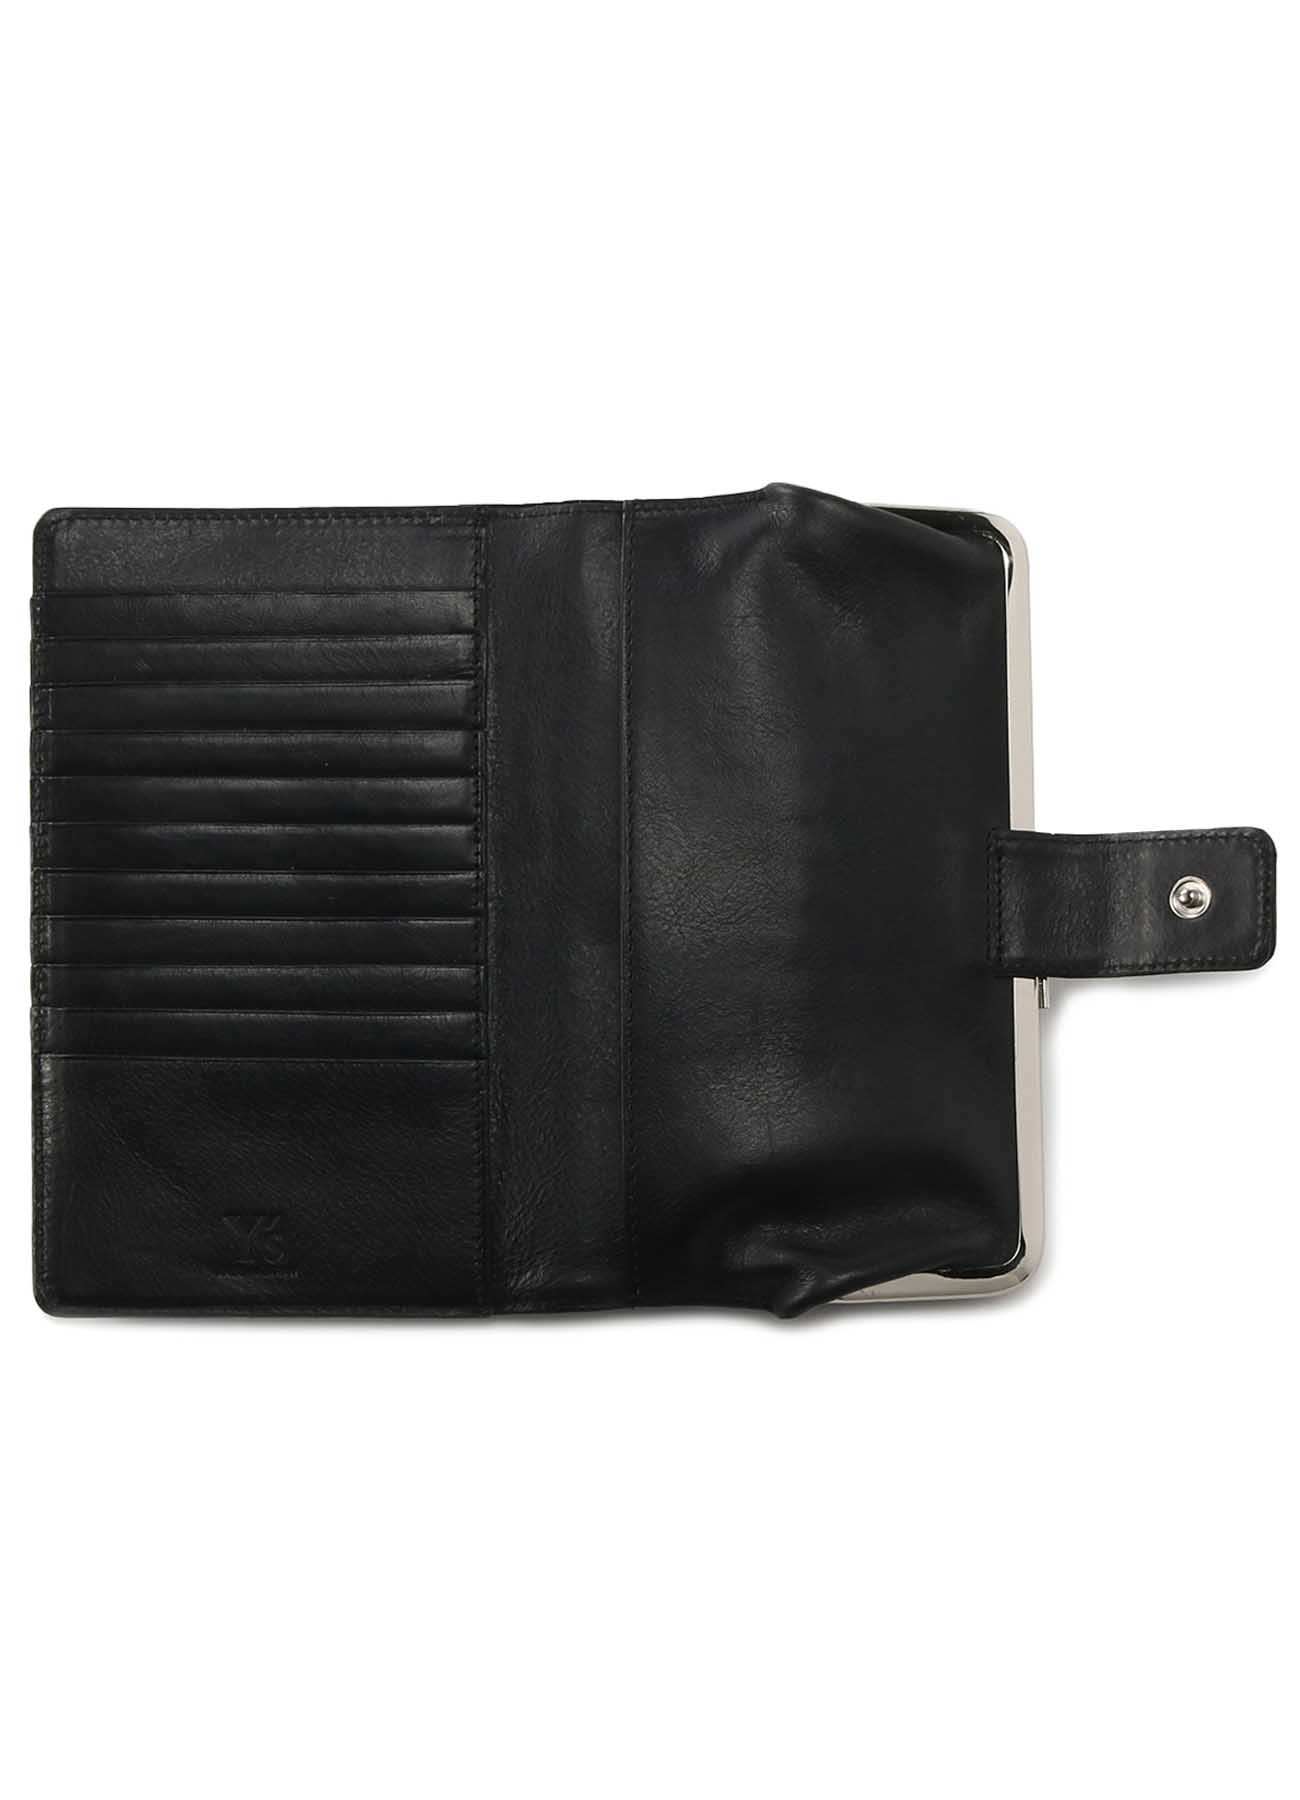 SEMI GLOSS LEATHER A CLASP LONG WALLET